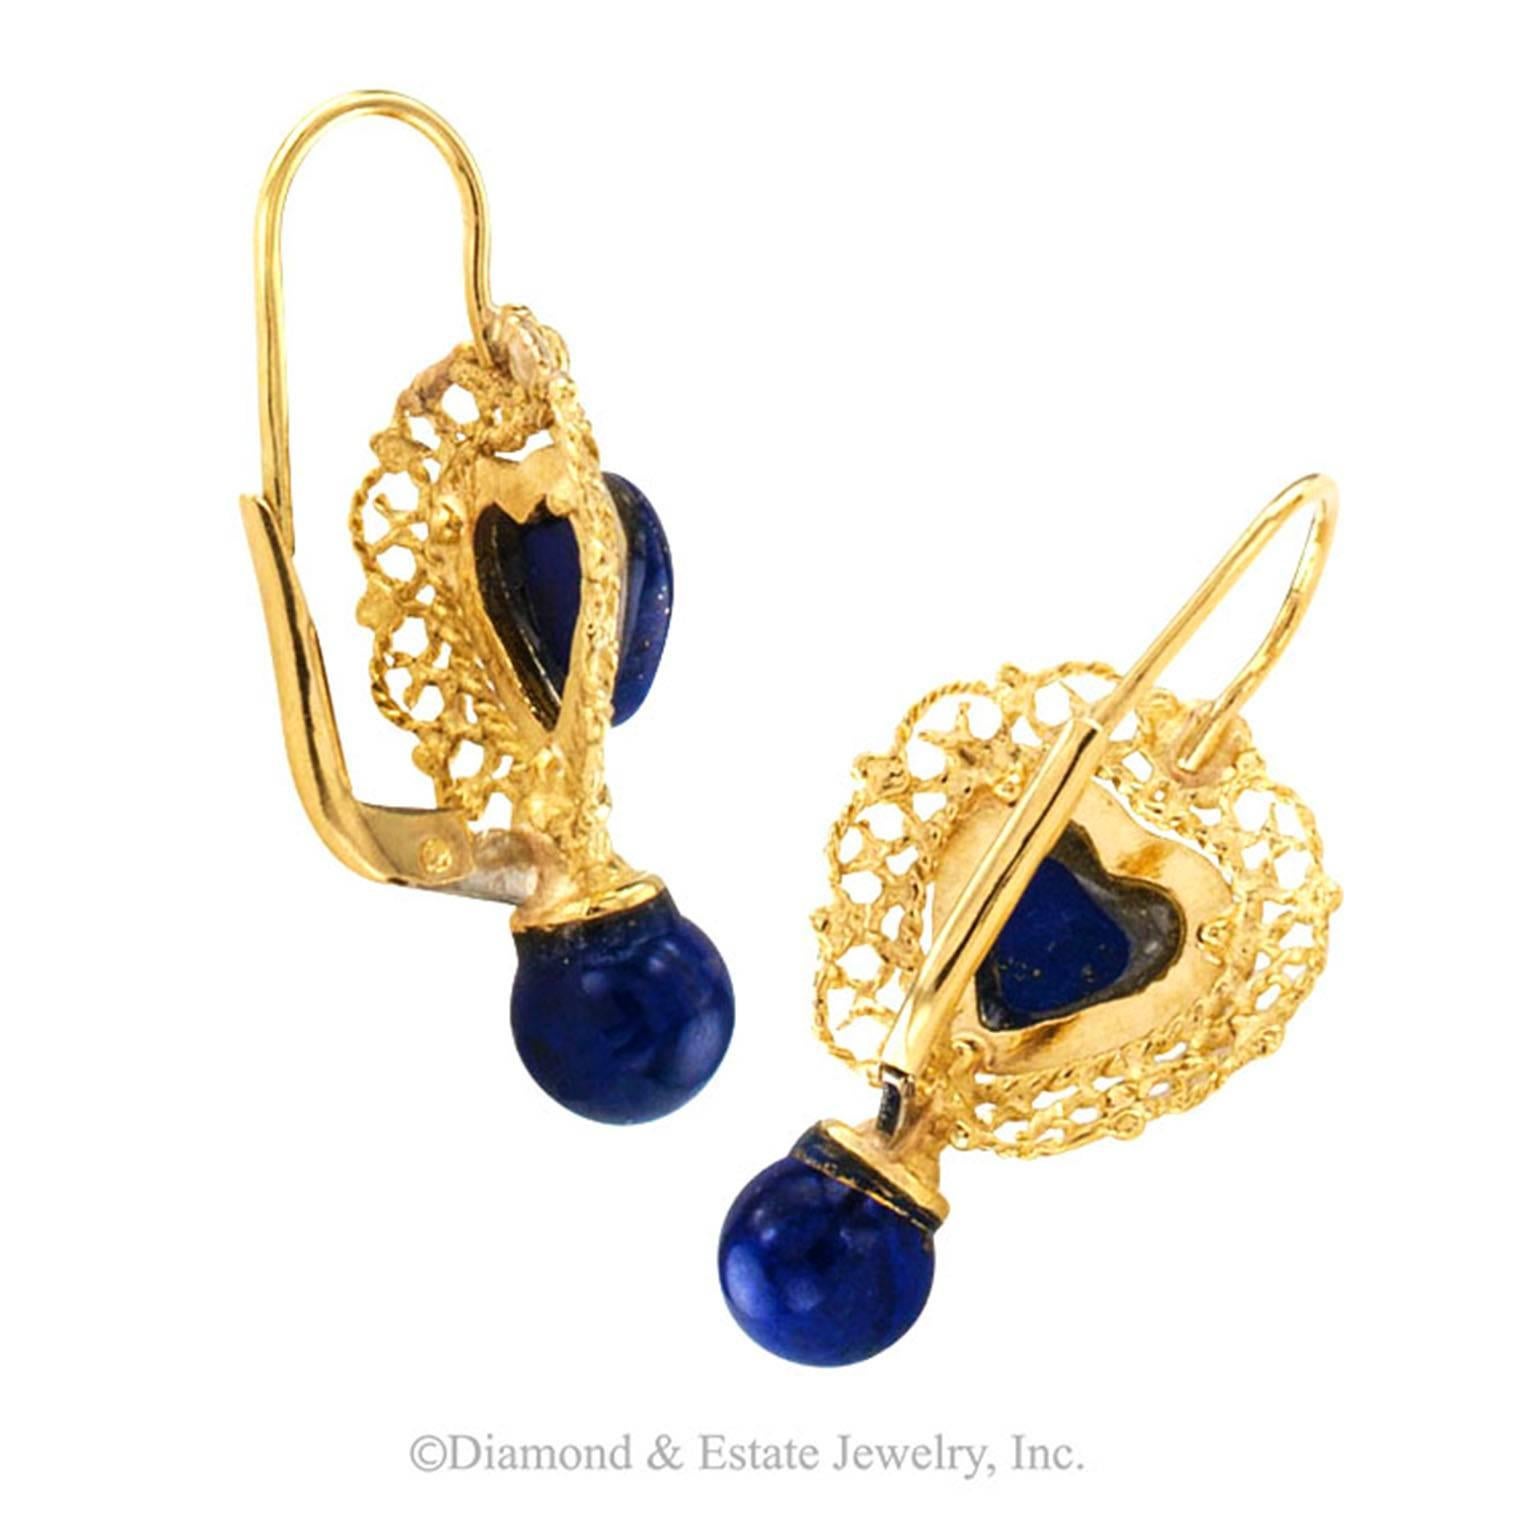 Lapis Lazuli and Gold Drop Earrings

Embracing filigree work formed by strands of corded yellow gold highlighting a pair of heart-shaped lapis lazuli cabochons with a great deal of pyrite inclusions that resemble shimmering stars in the night sky,